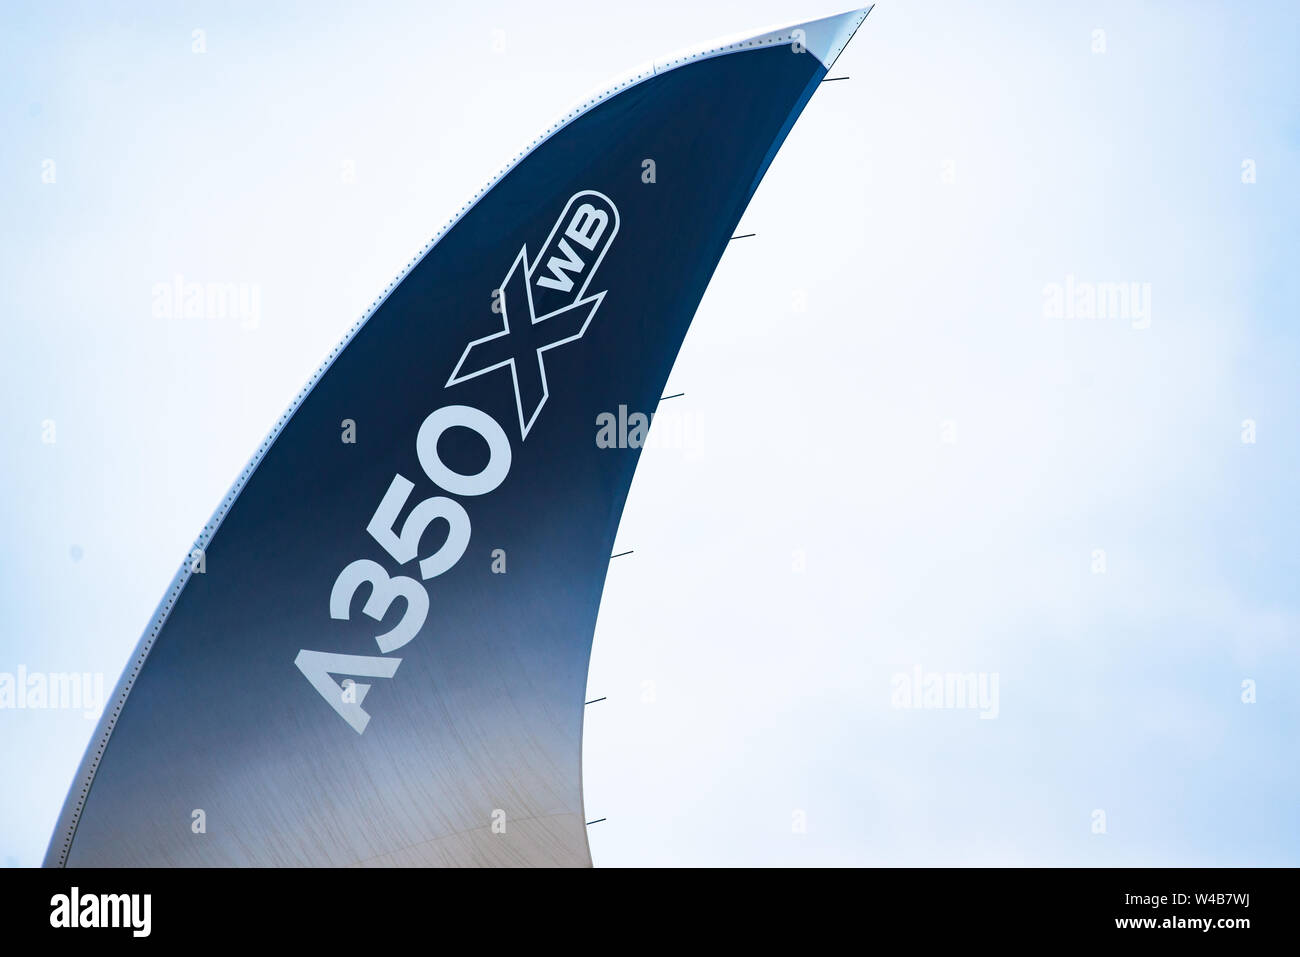 Singapore - February 4, 2018: Wingtip device, or winglet, of an Airbus A350-1000 XWB in Airbus factory livery during Singapore Airshow at Changi Exhib Stock Photo